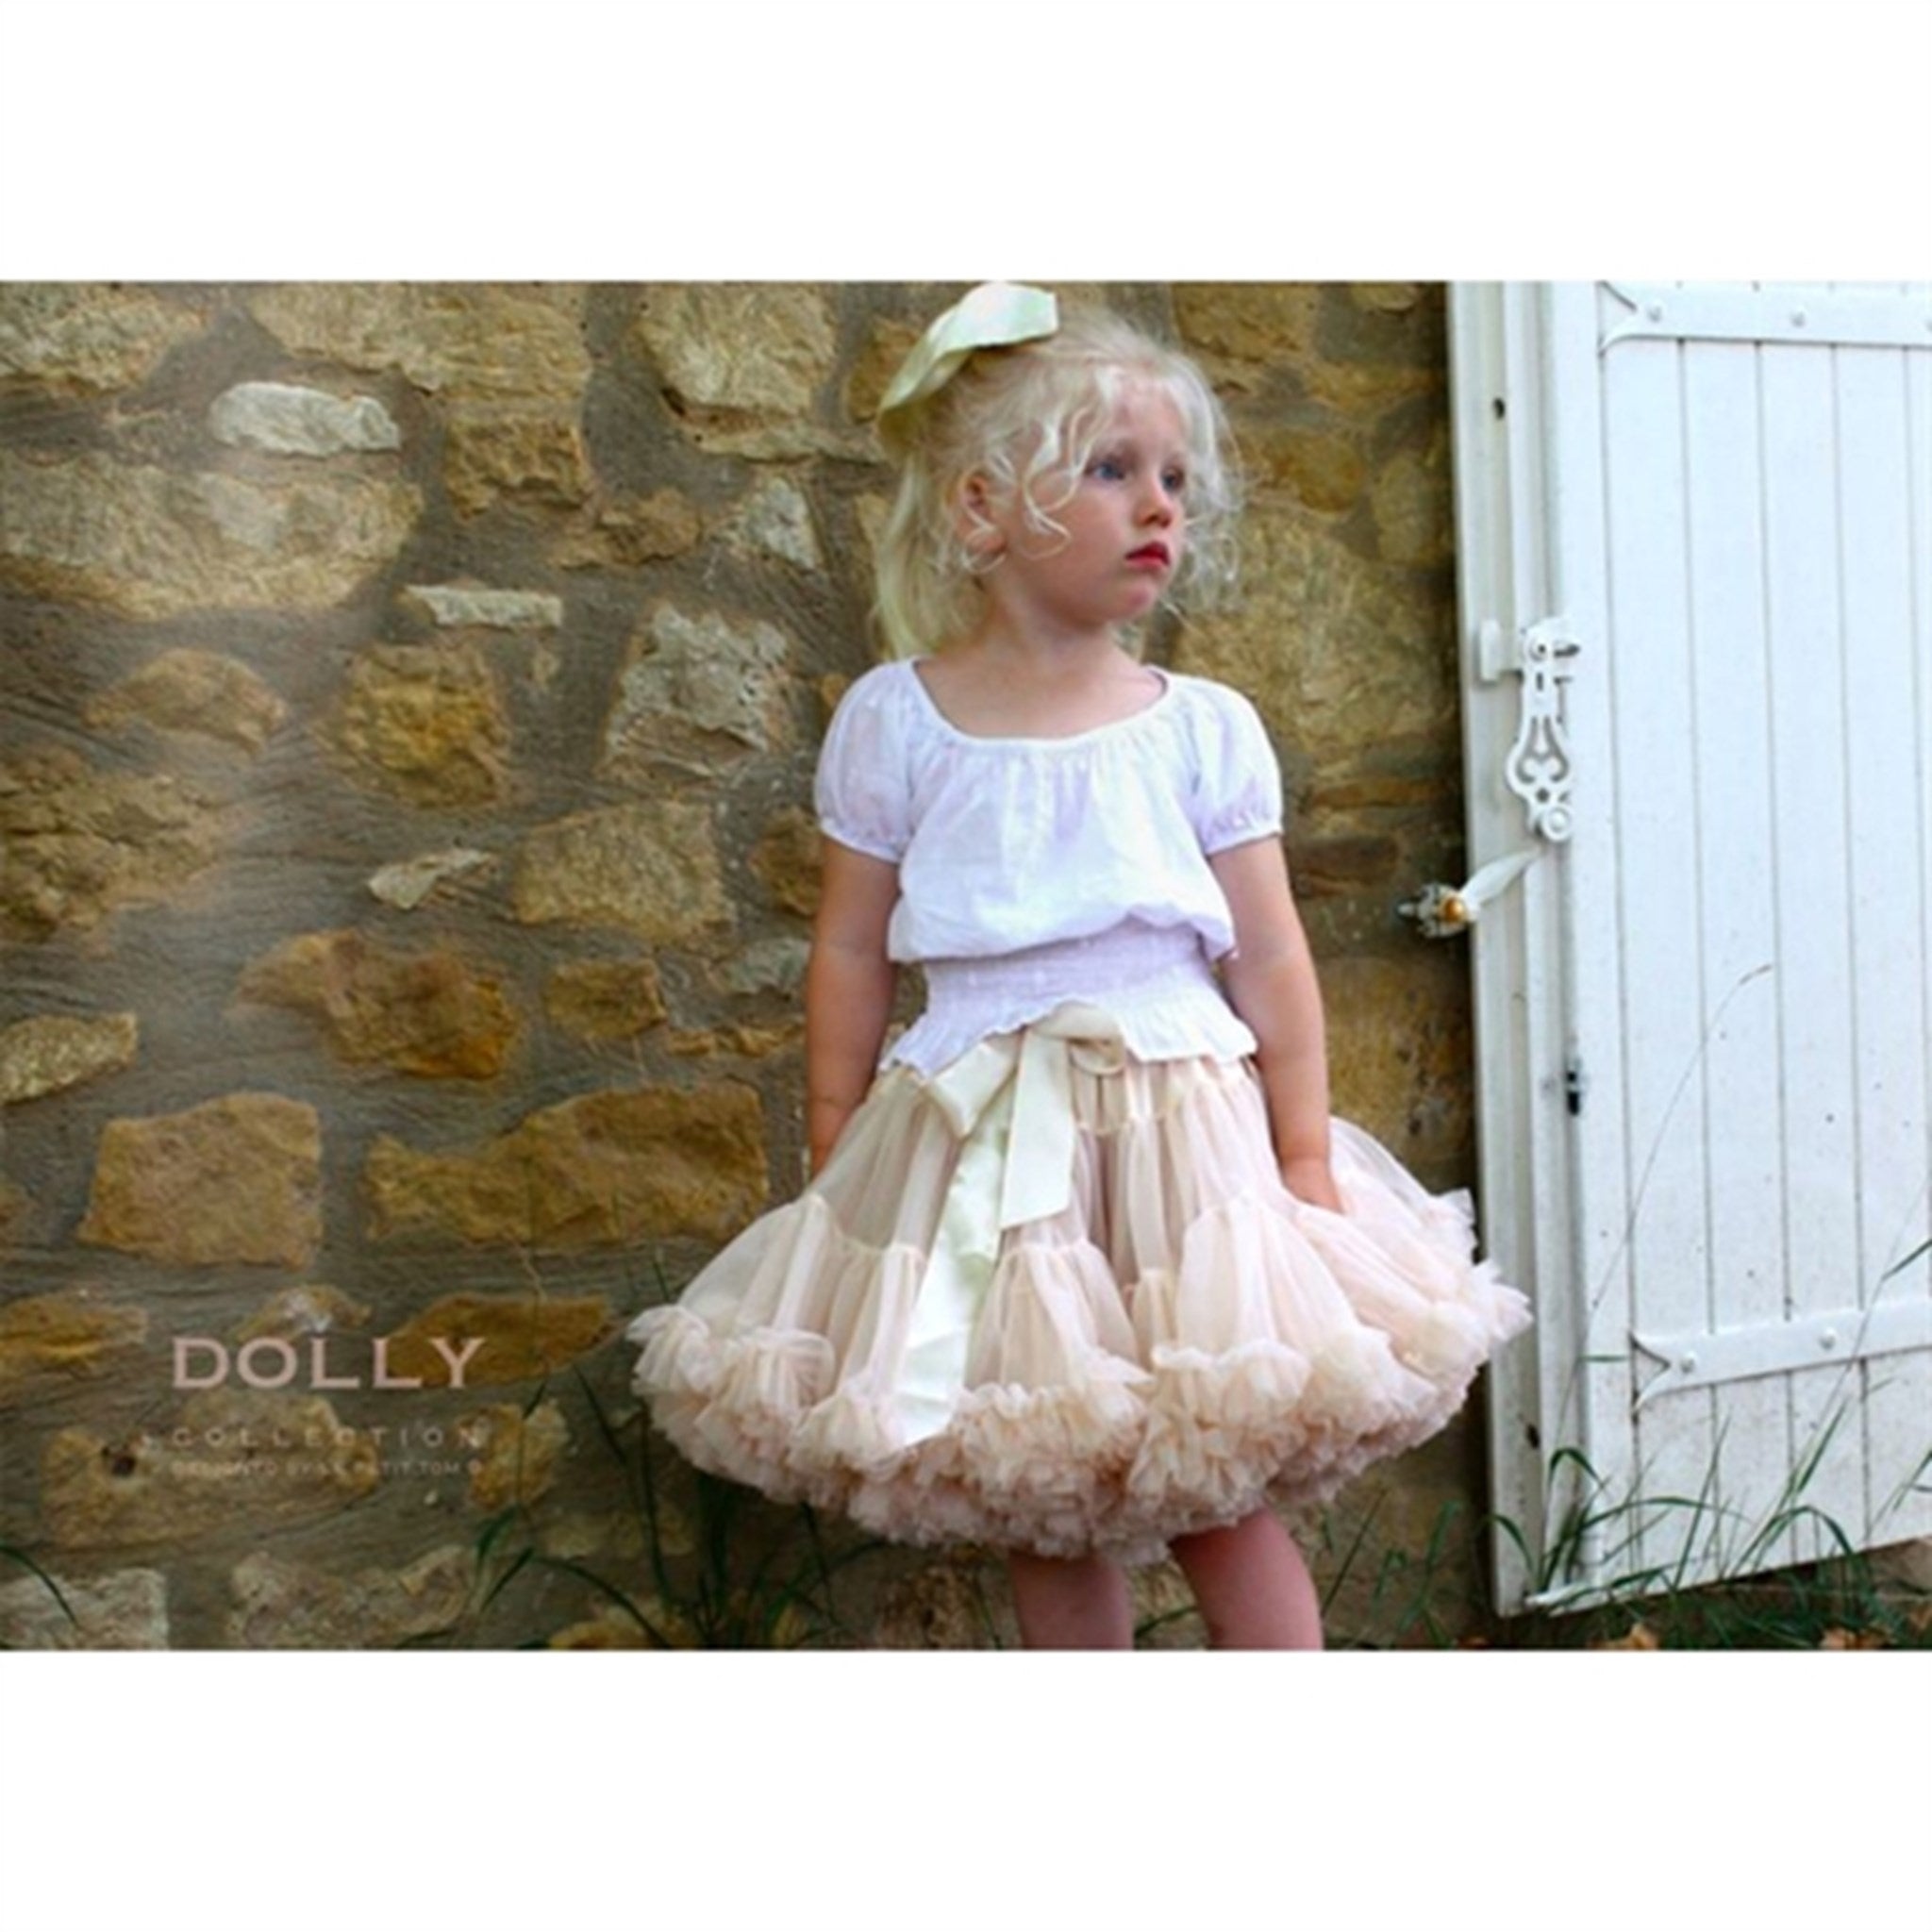 Dolly by Le Petit Tom Skirt Cream 2